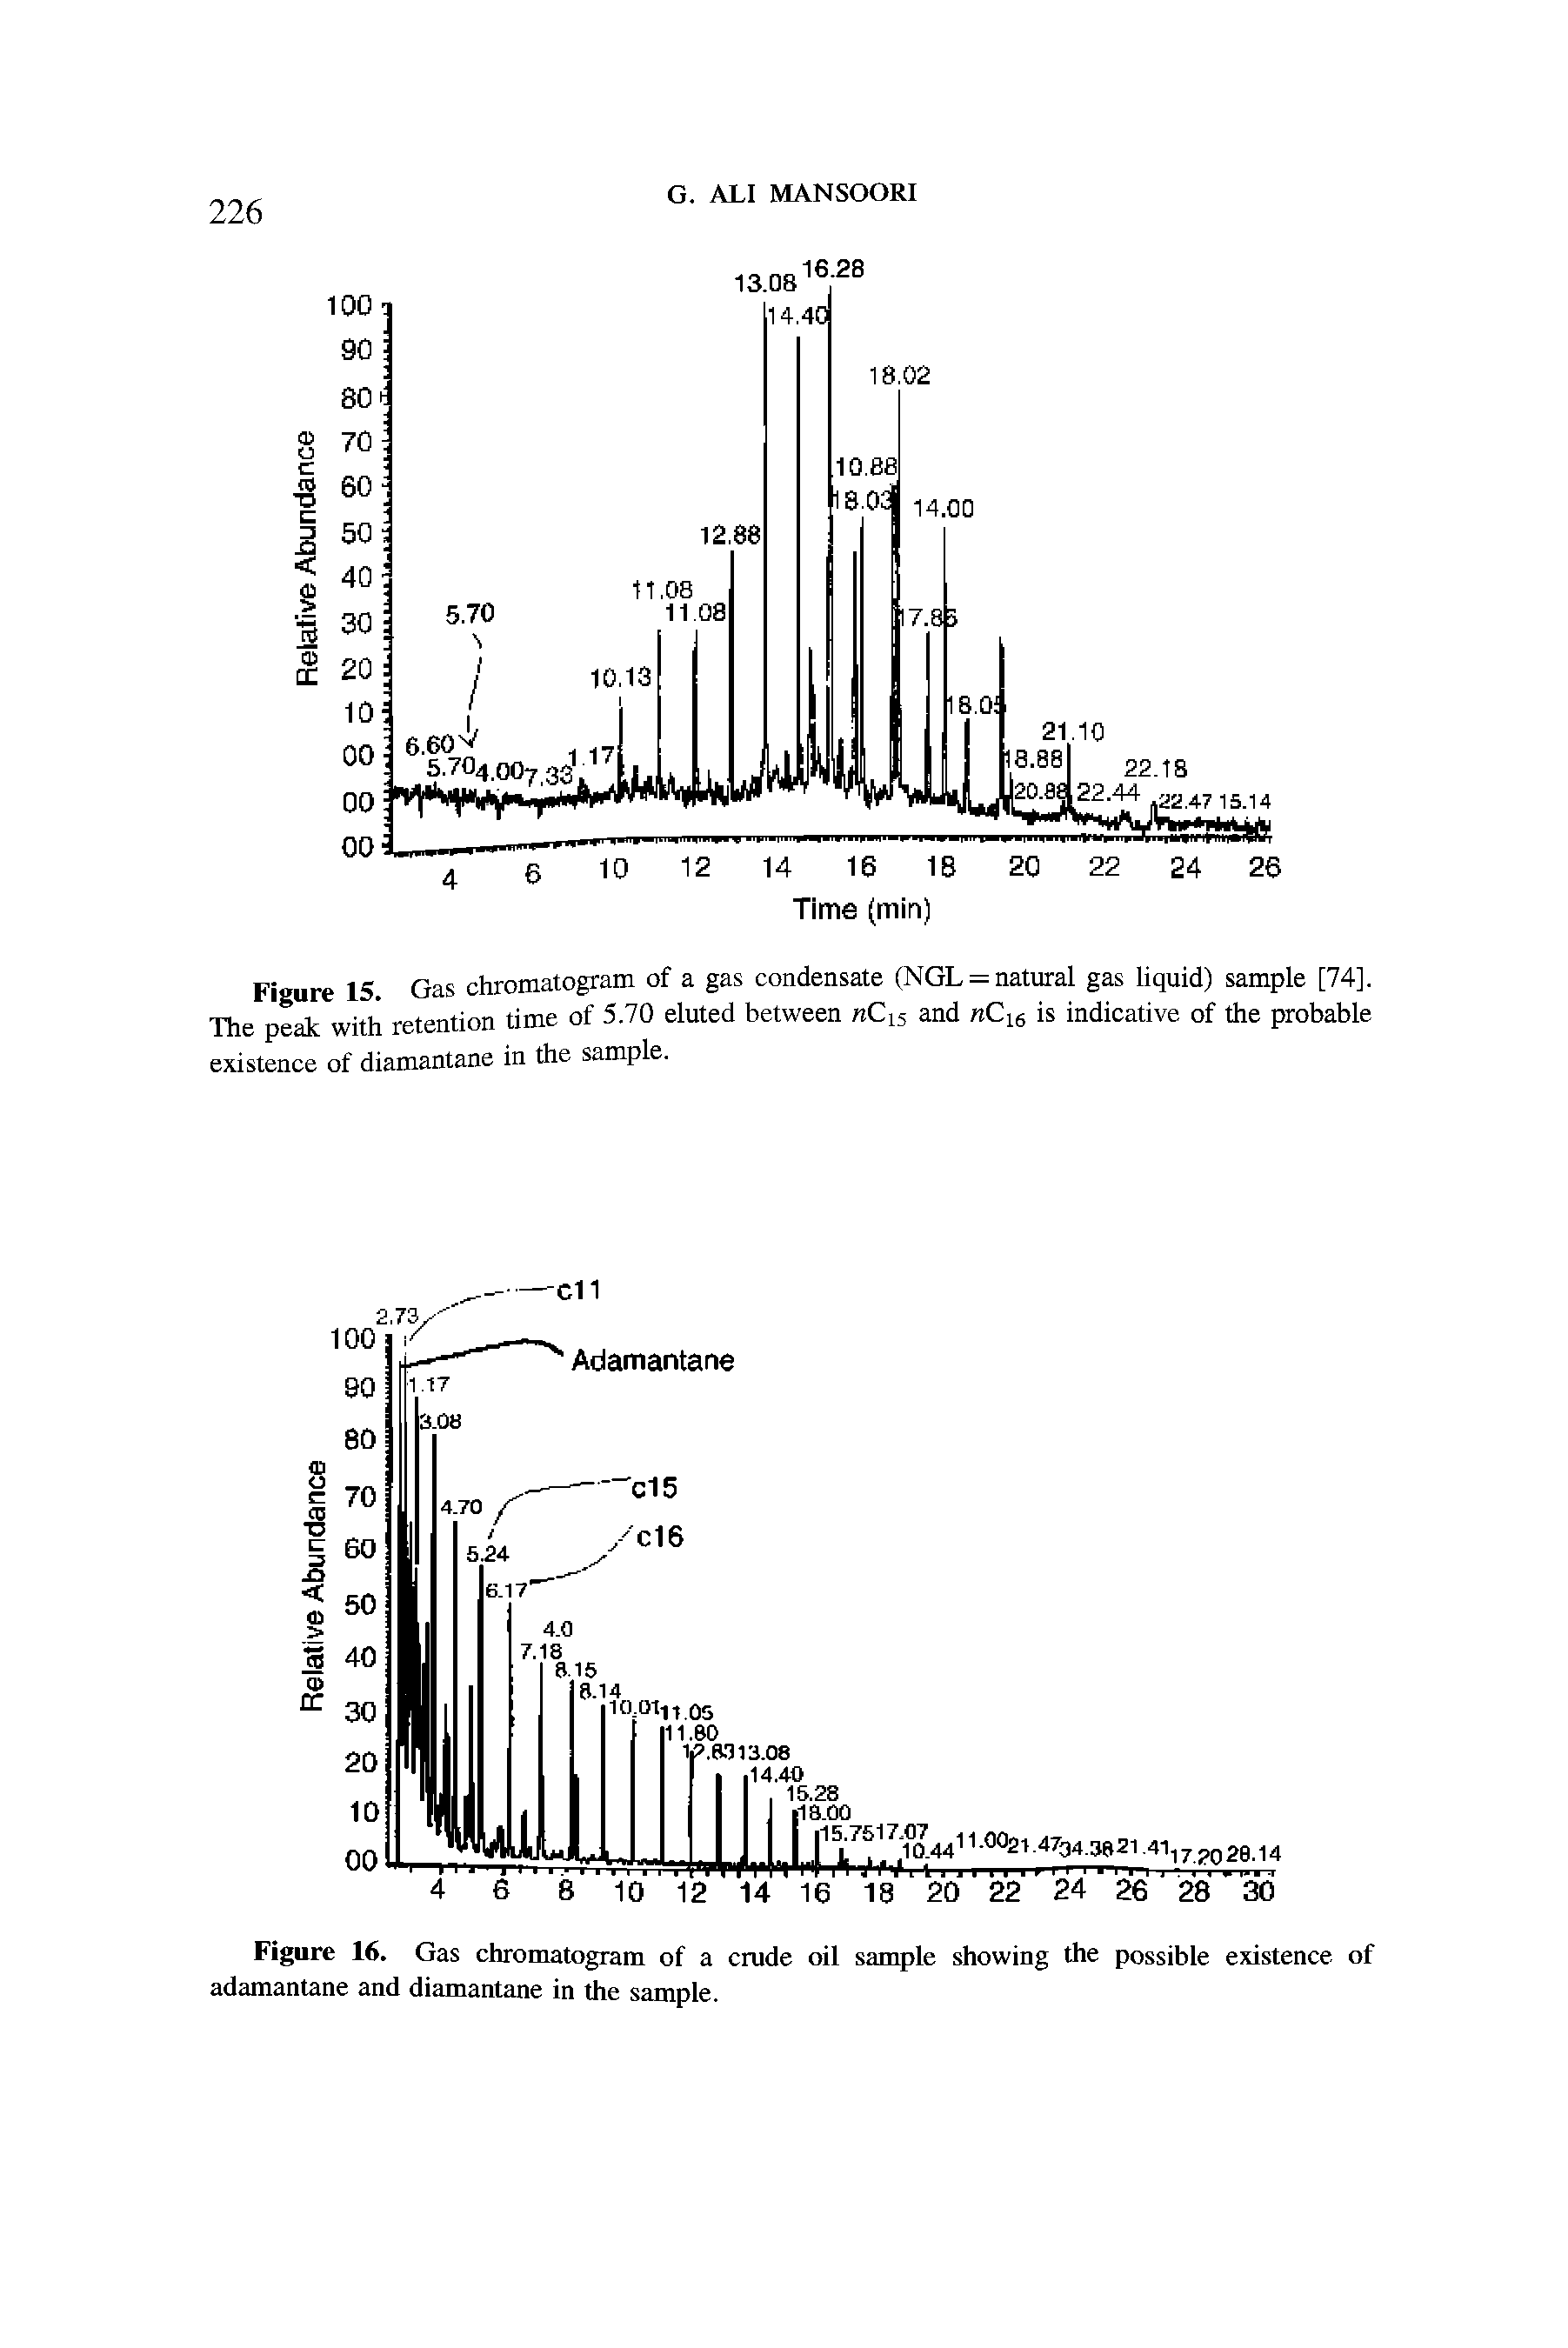 Figure 15 Gas chromatogram of a gas condensate (NGL = natural gas liquid) sample [74]. The peak with retention time of 5.70 eluted between nCis and nCis is indicative of the probable existence of diamantane in the sample.